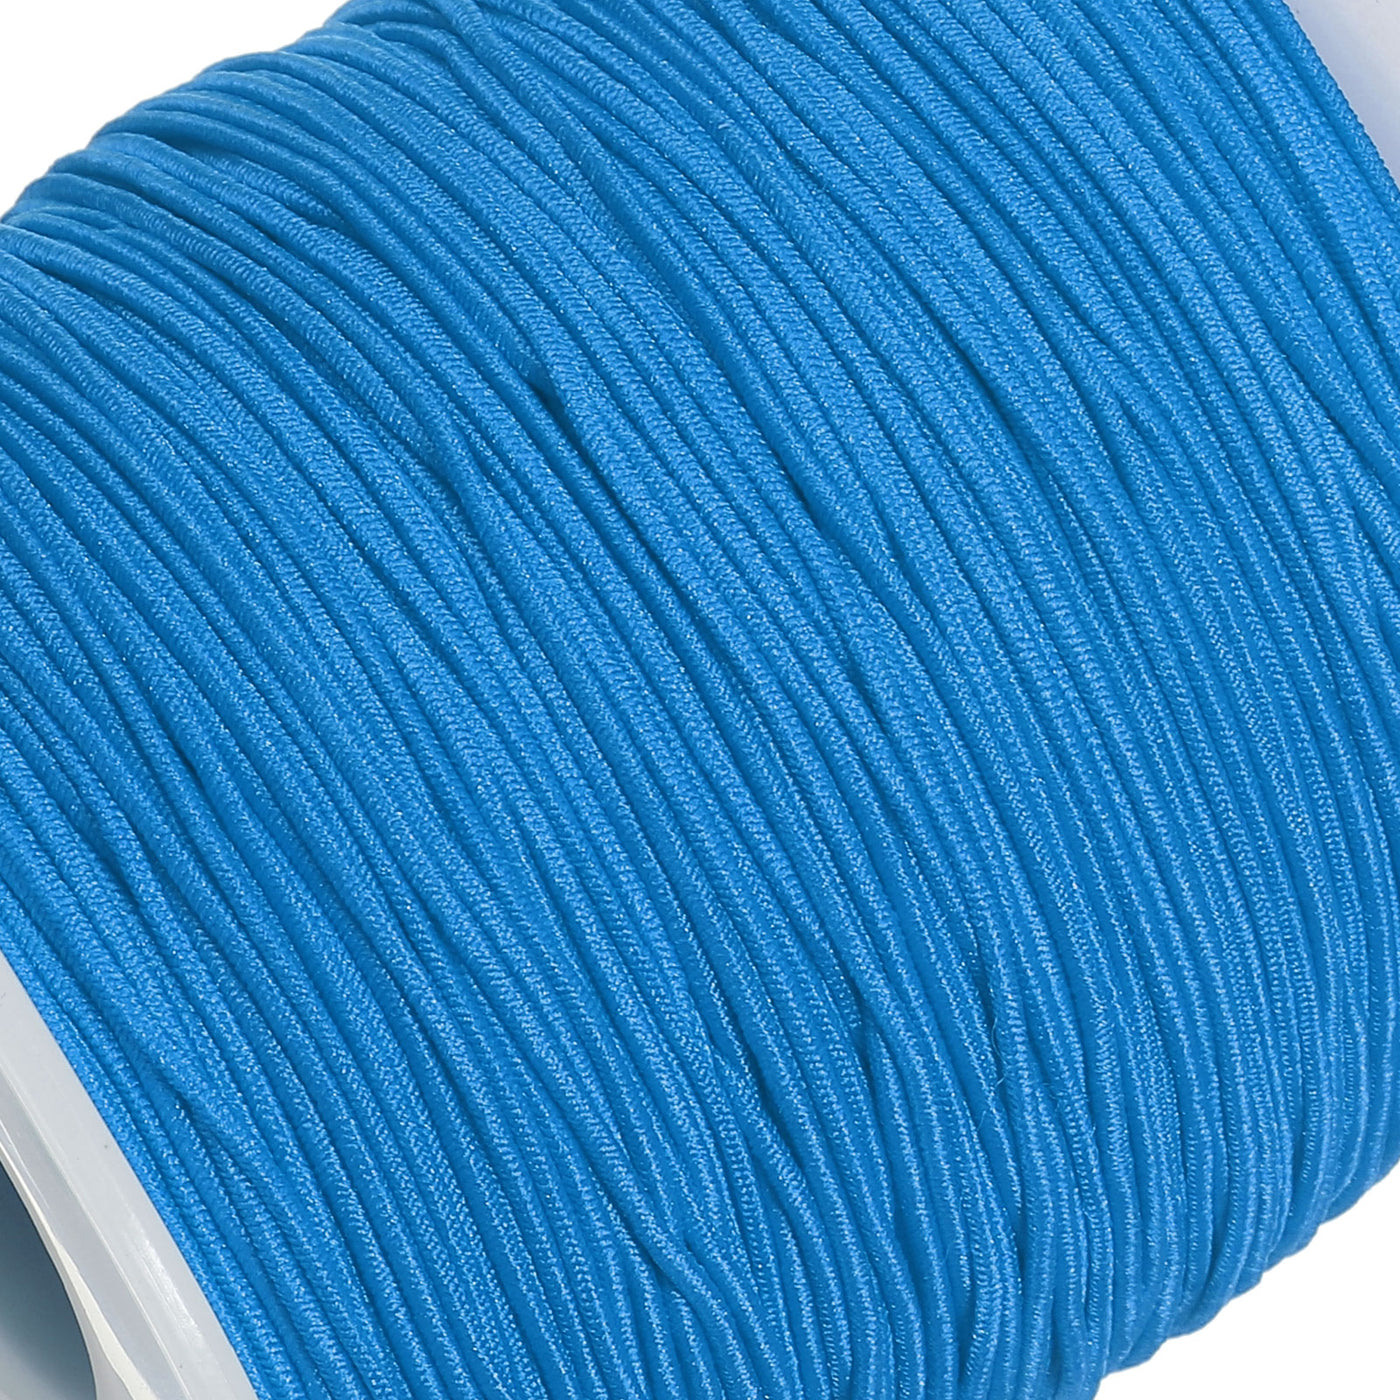 Harfington Elastic Cord Stretchy String 0.8mm 109 Yards Sky Blue for Crafts, Jewelry Making, Bracelets, Necklaces, Beading